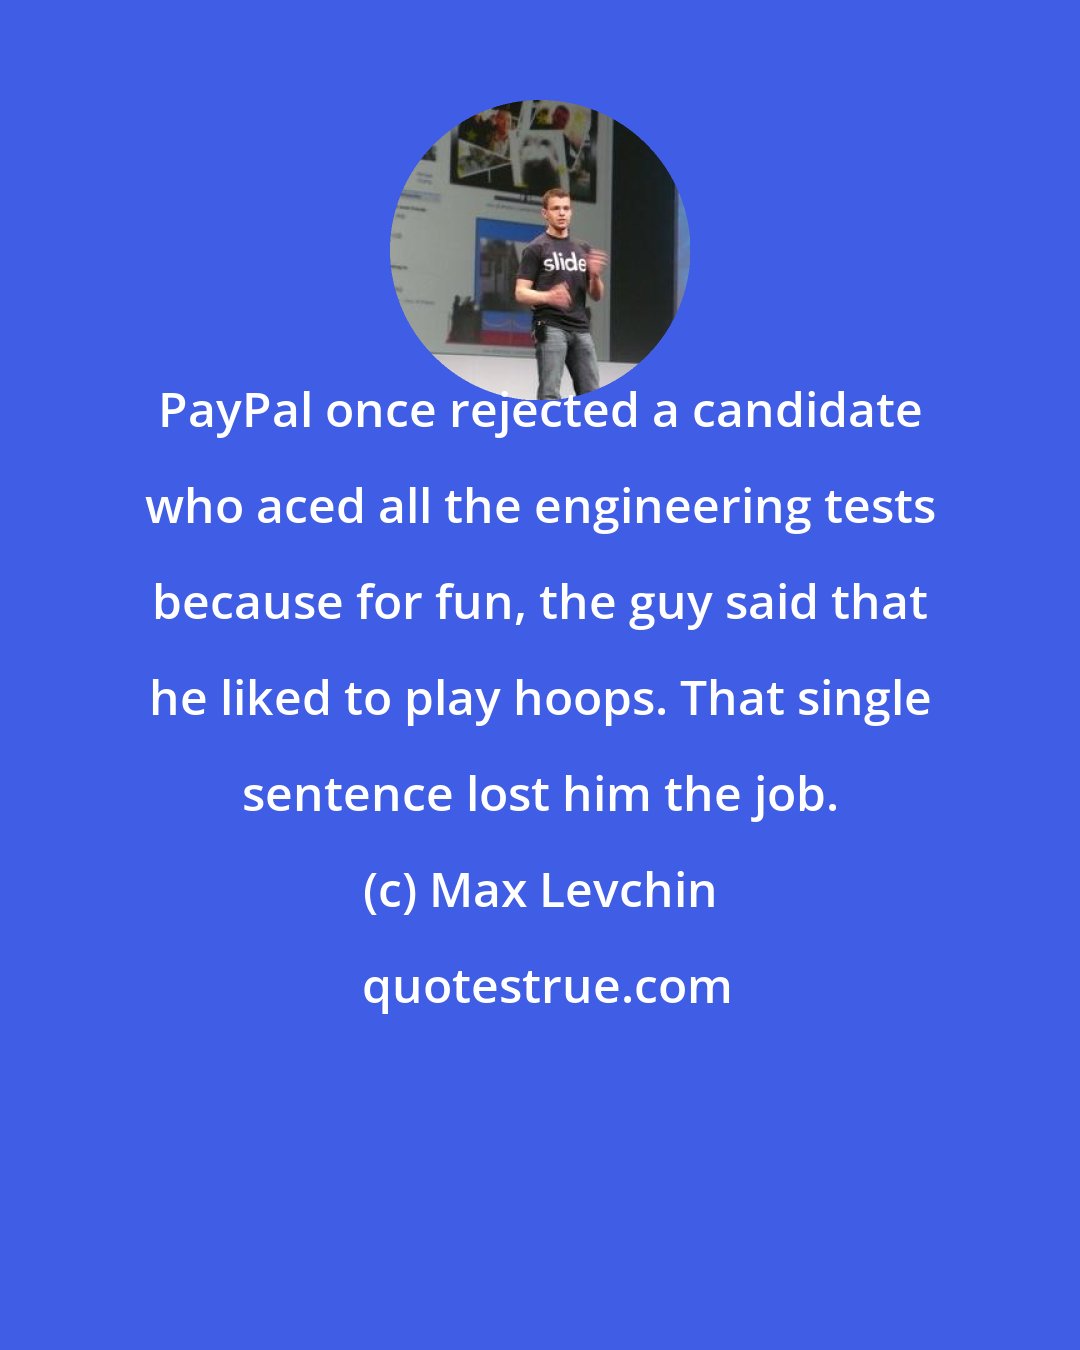 Max Levchin: PayPal once rejected a candidate who aced all the engineering tests because for fun, the guy said that he liked to play hoops. That single sentence lost him the job.